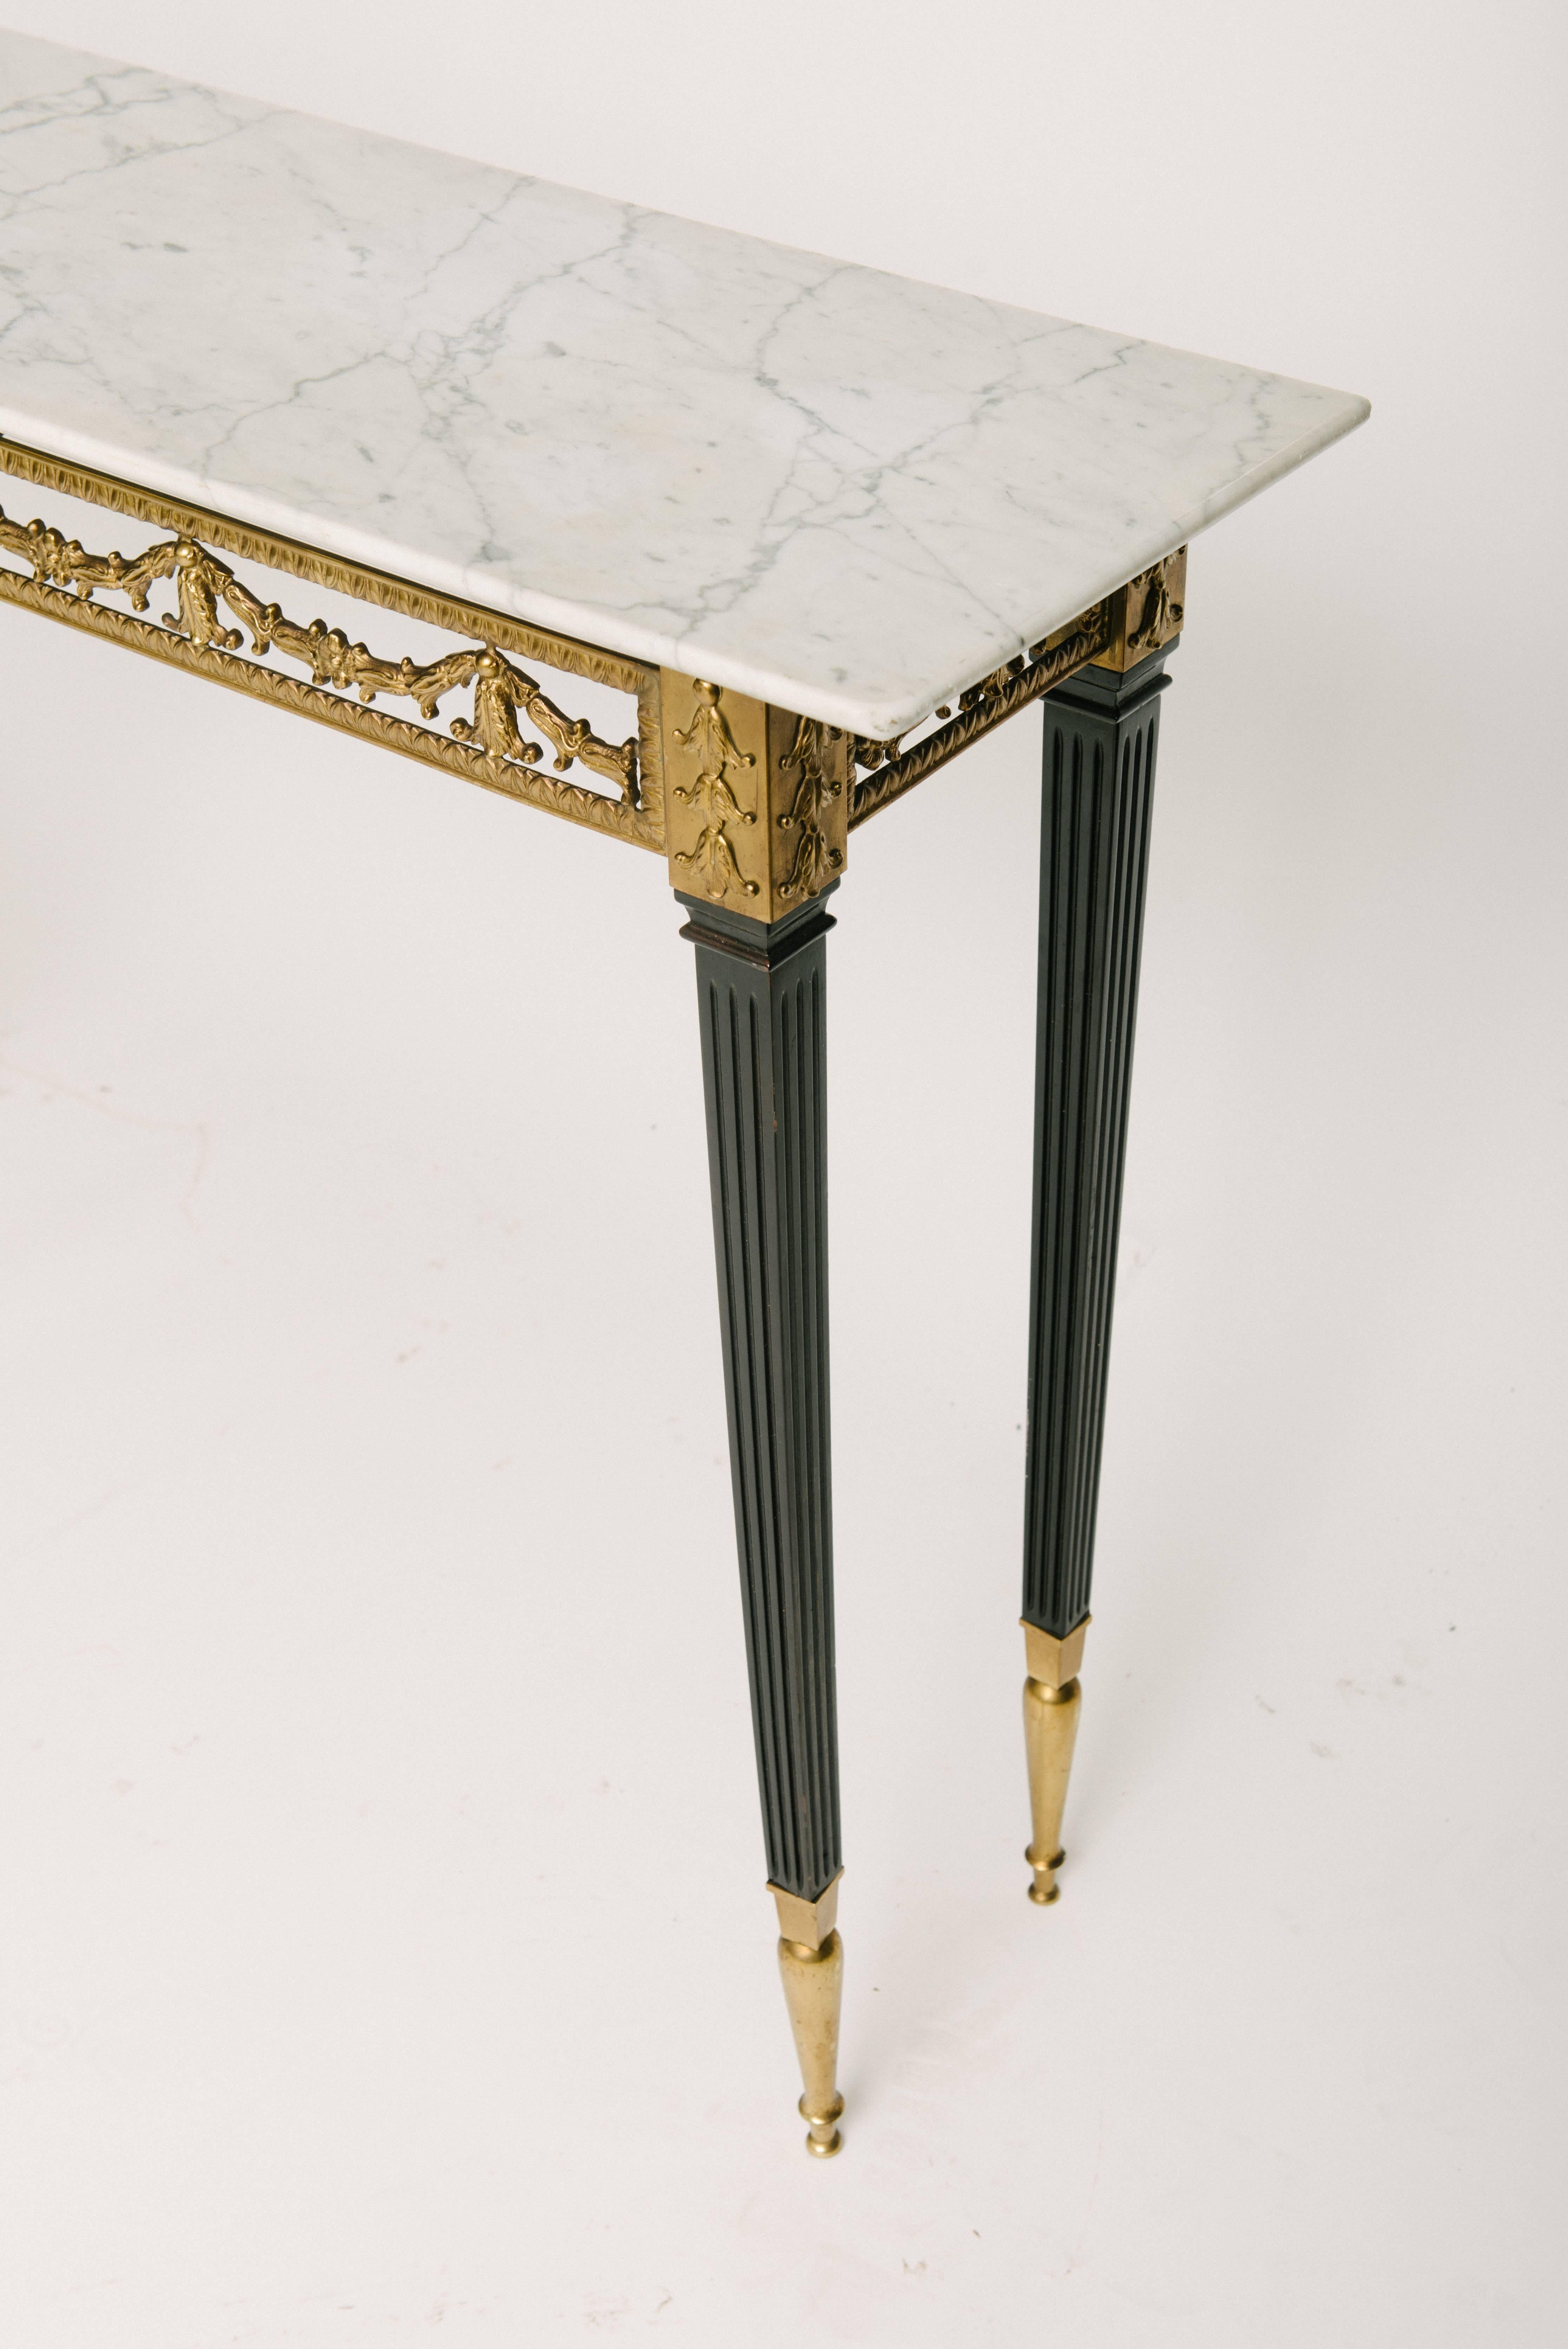 Gilt Italian Neoclassical Style Bronze Console Table with Marble Top